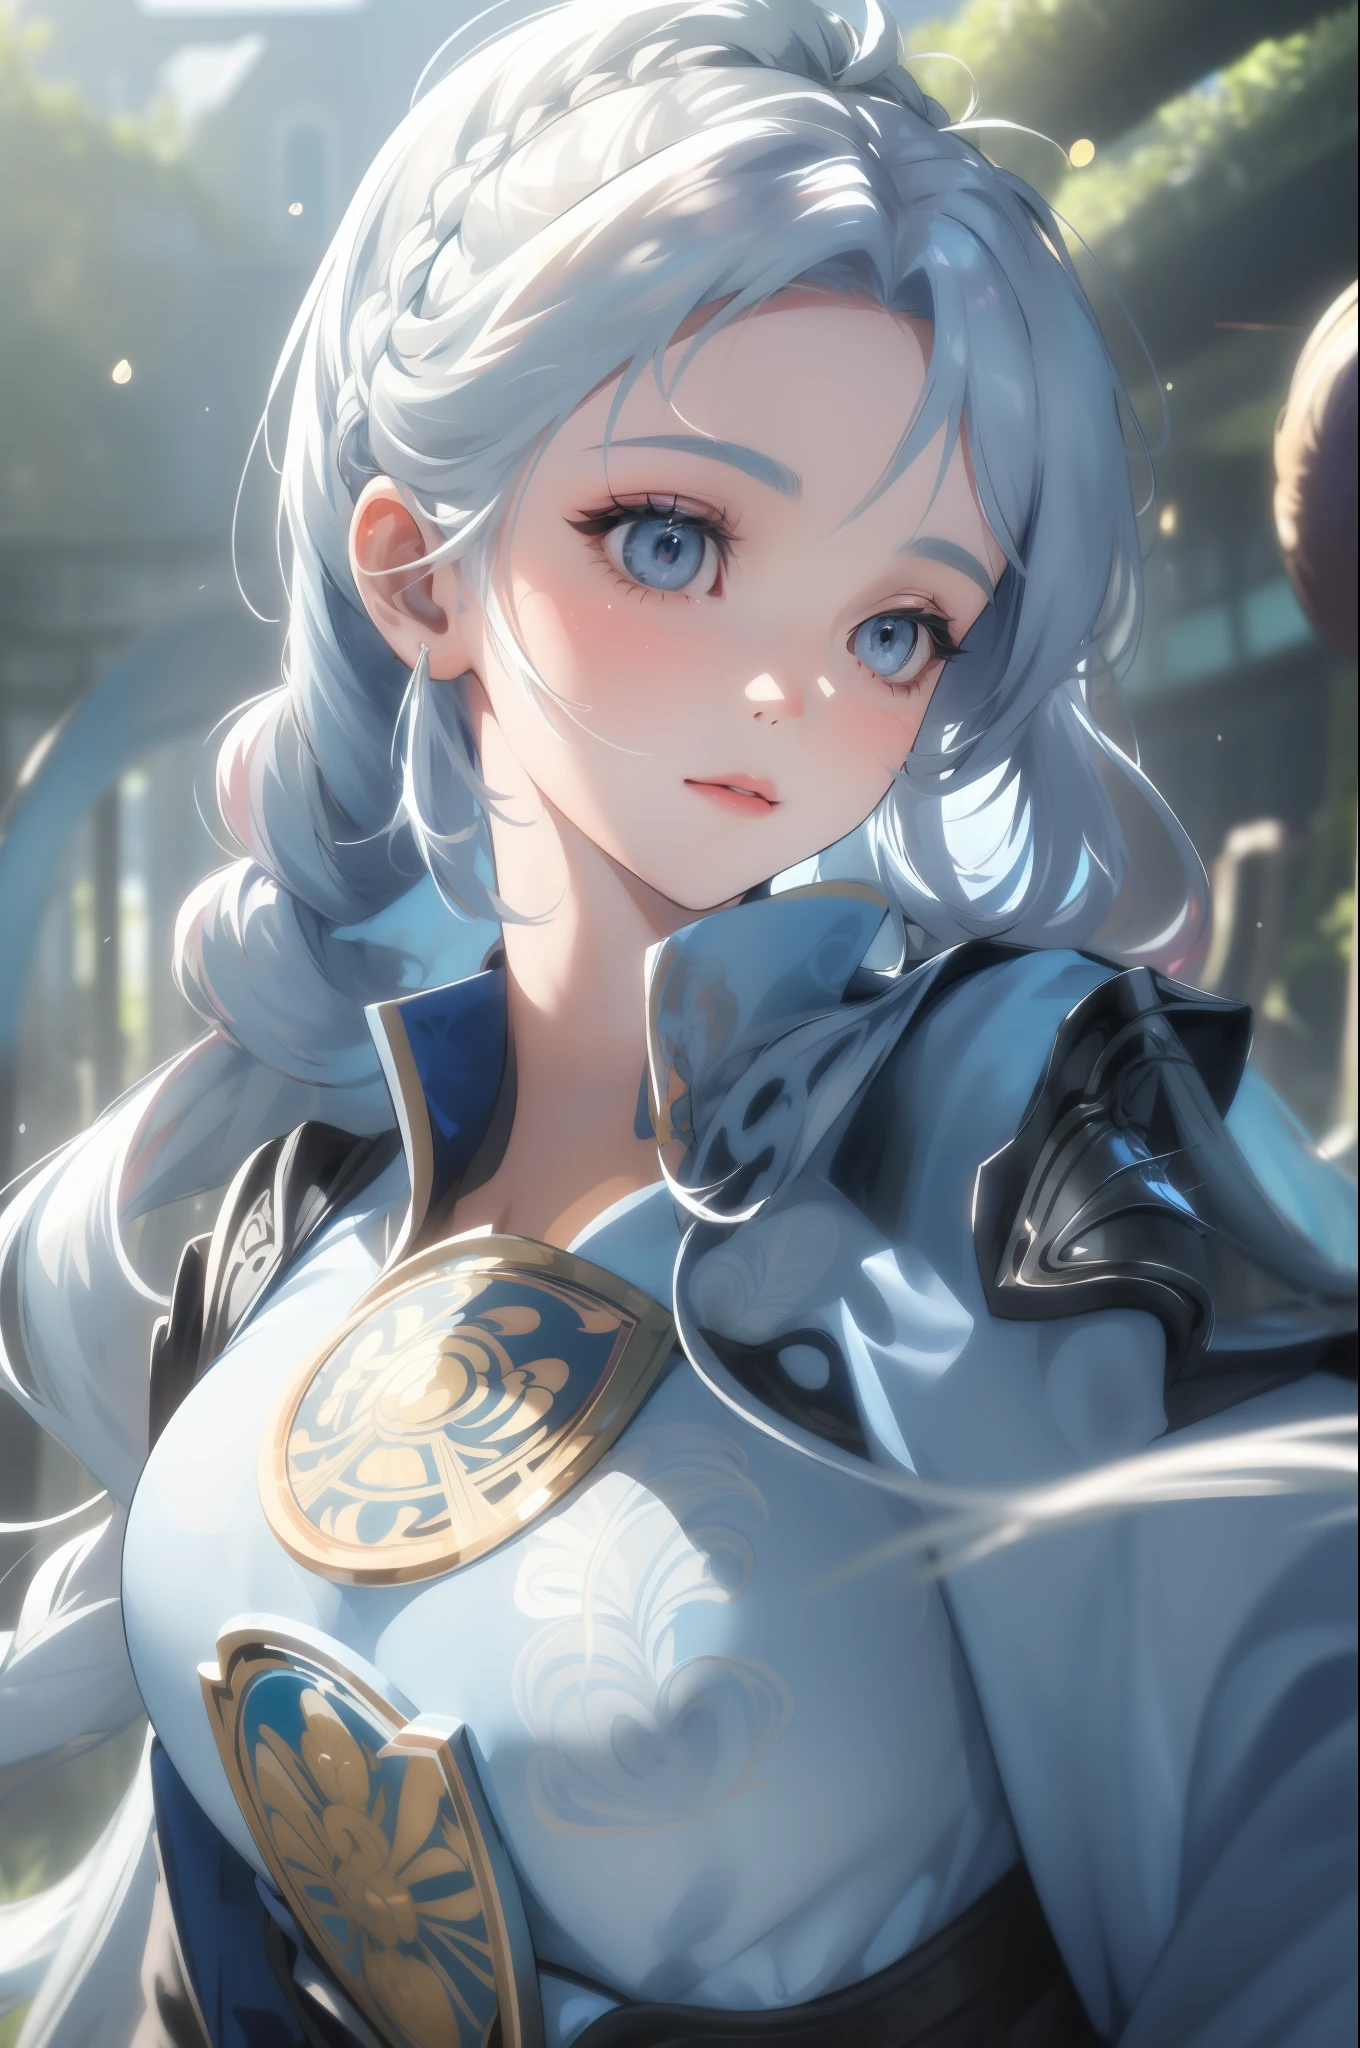 (best quality,masterpiece:1.2), 1girl, long hair, beautiful blue eyes, elegant silver wavy hair, braid, flowing dress, large-sized breasts, radiant smile, delicate features, tranquil forest, vast open field, dappled sunlight, serene atmosphere, 
(knightly armor:1.1),
(close up to upper body:1.1), detailed facial expression, refined skin texture, 
(vivid colors), vibrant hues, rich color palette, soft focus background, perfect body,